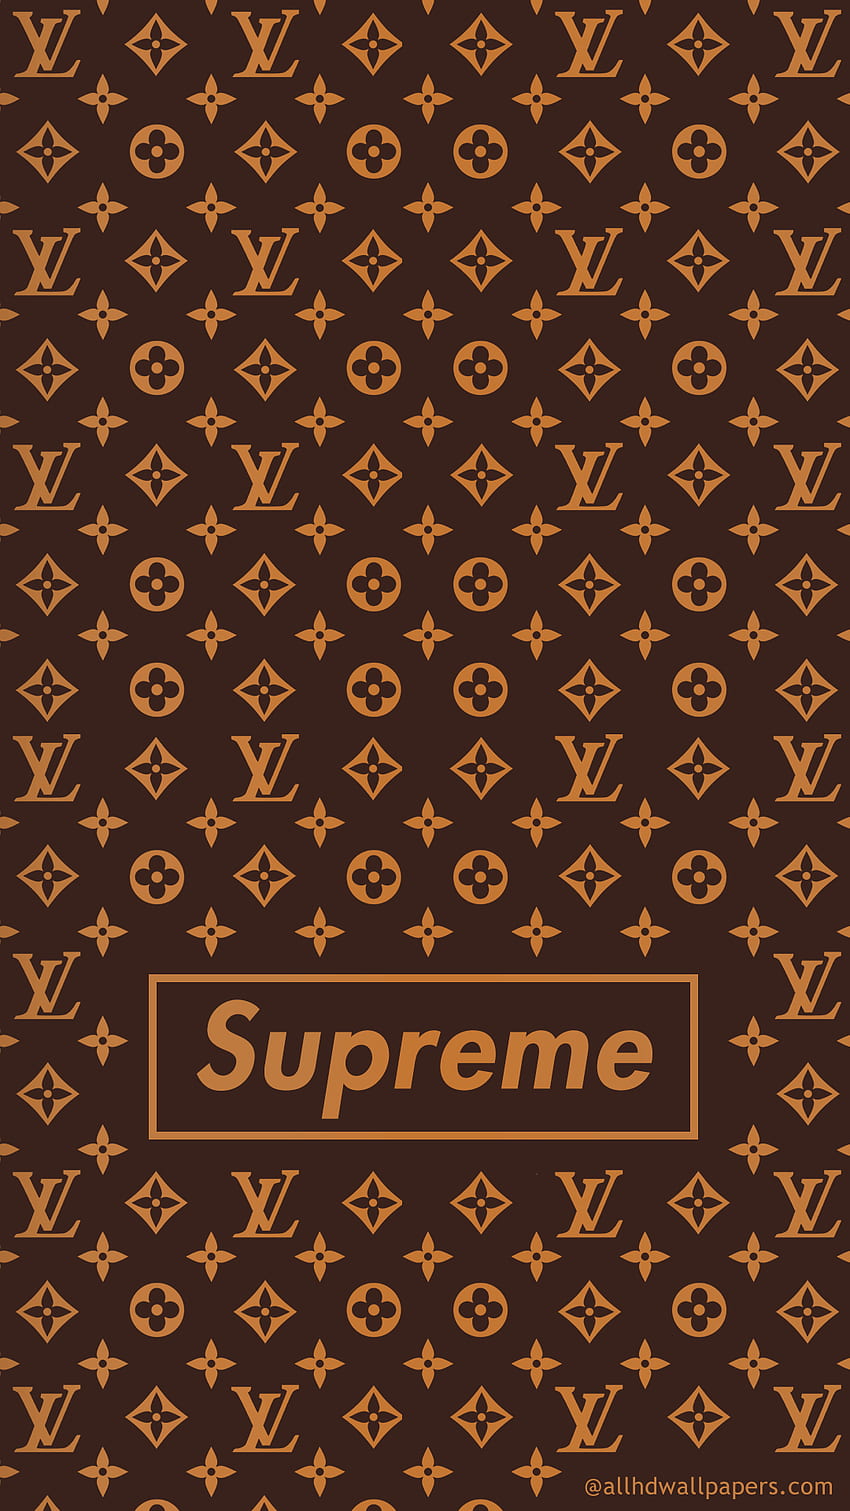 Louis v drips  Iphone background wallpaper, Louis vuitton iphone  wallpaper, Iphone wallpaper